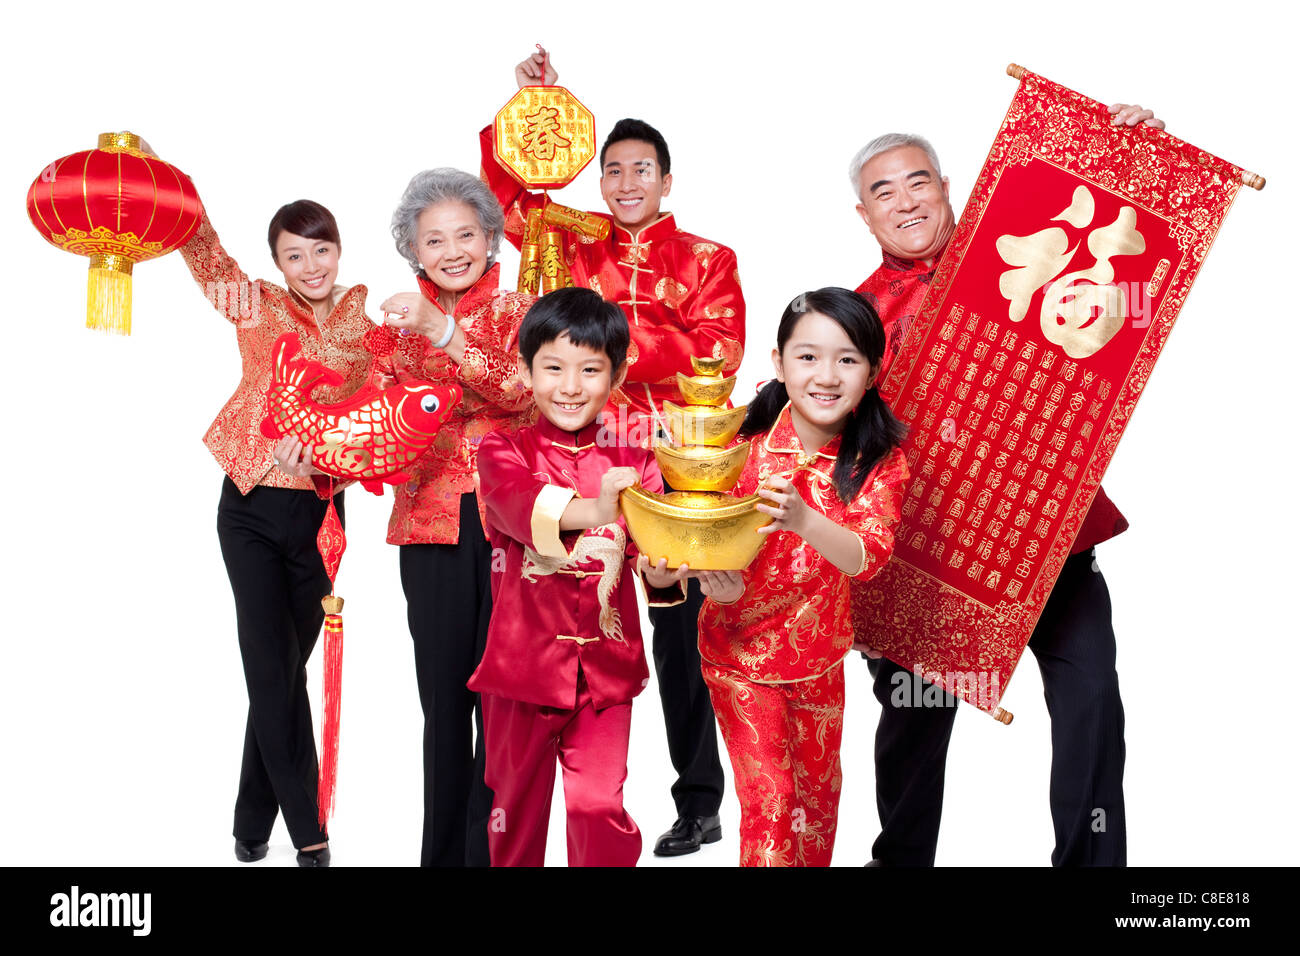 Family Dressed in Traditional Clothing Celebrating Chinese New Year Stock Photo ...